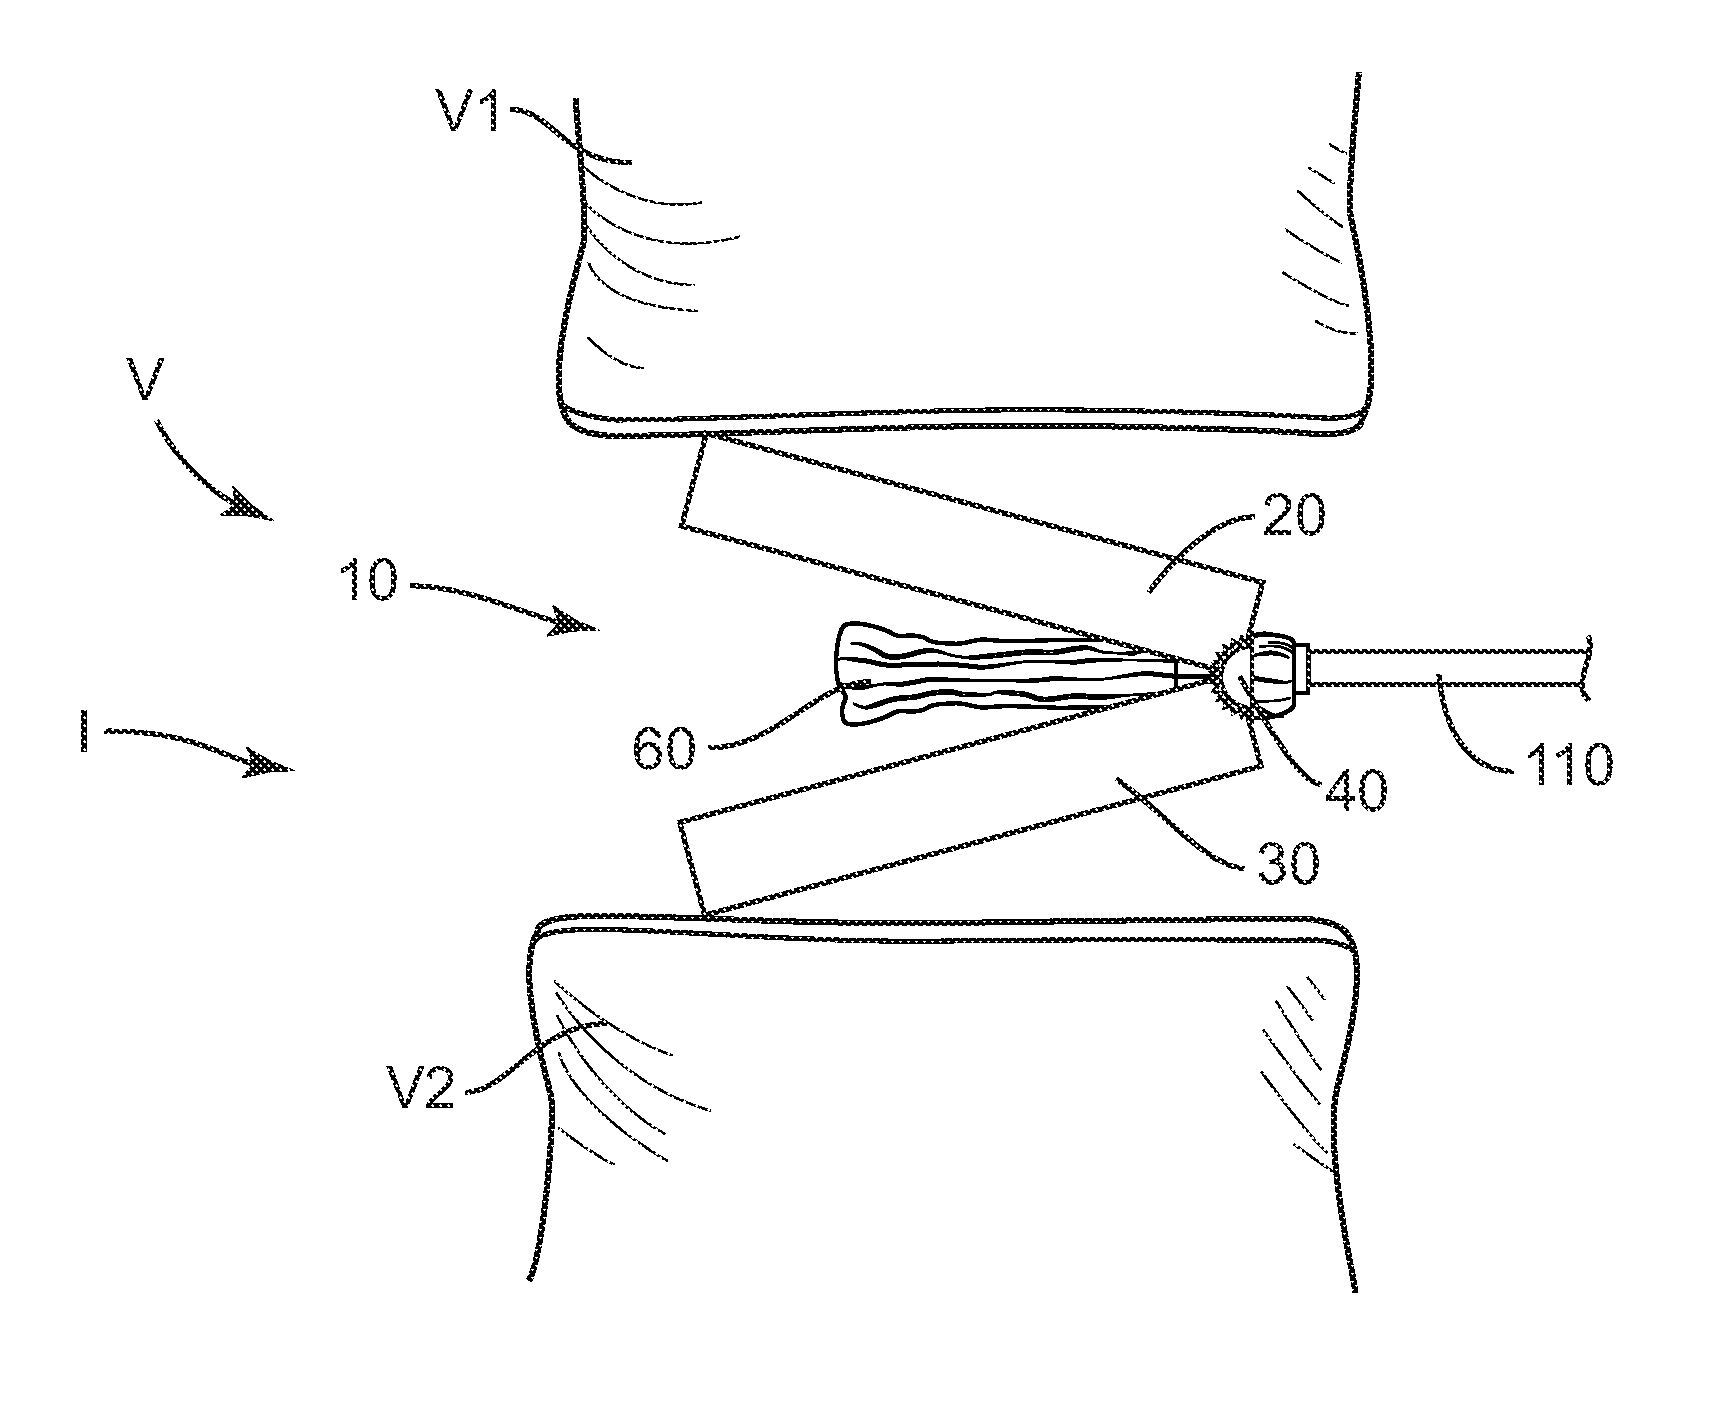 Expandable implant system and methods of use